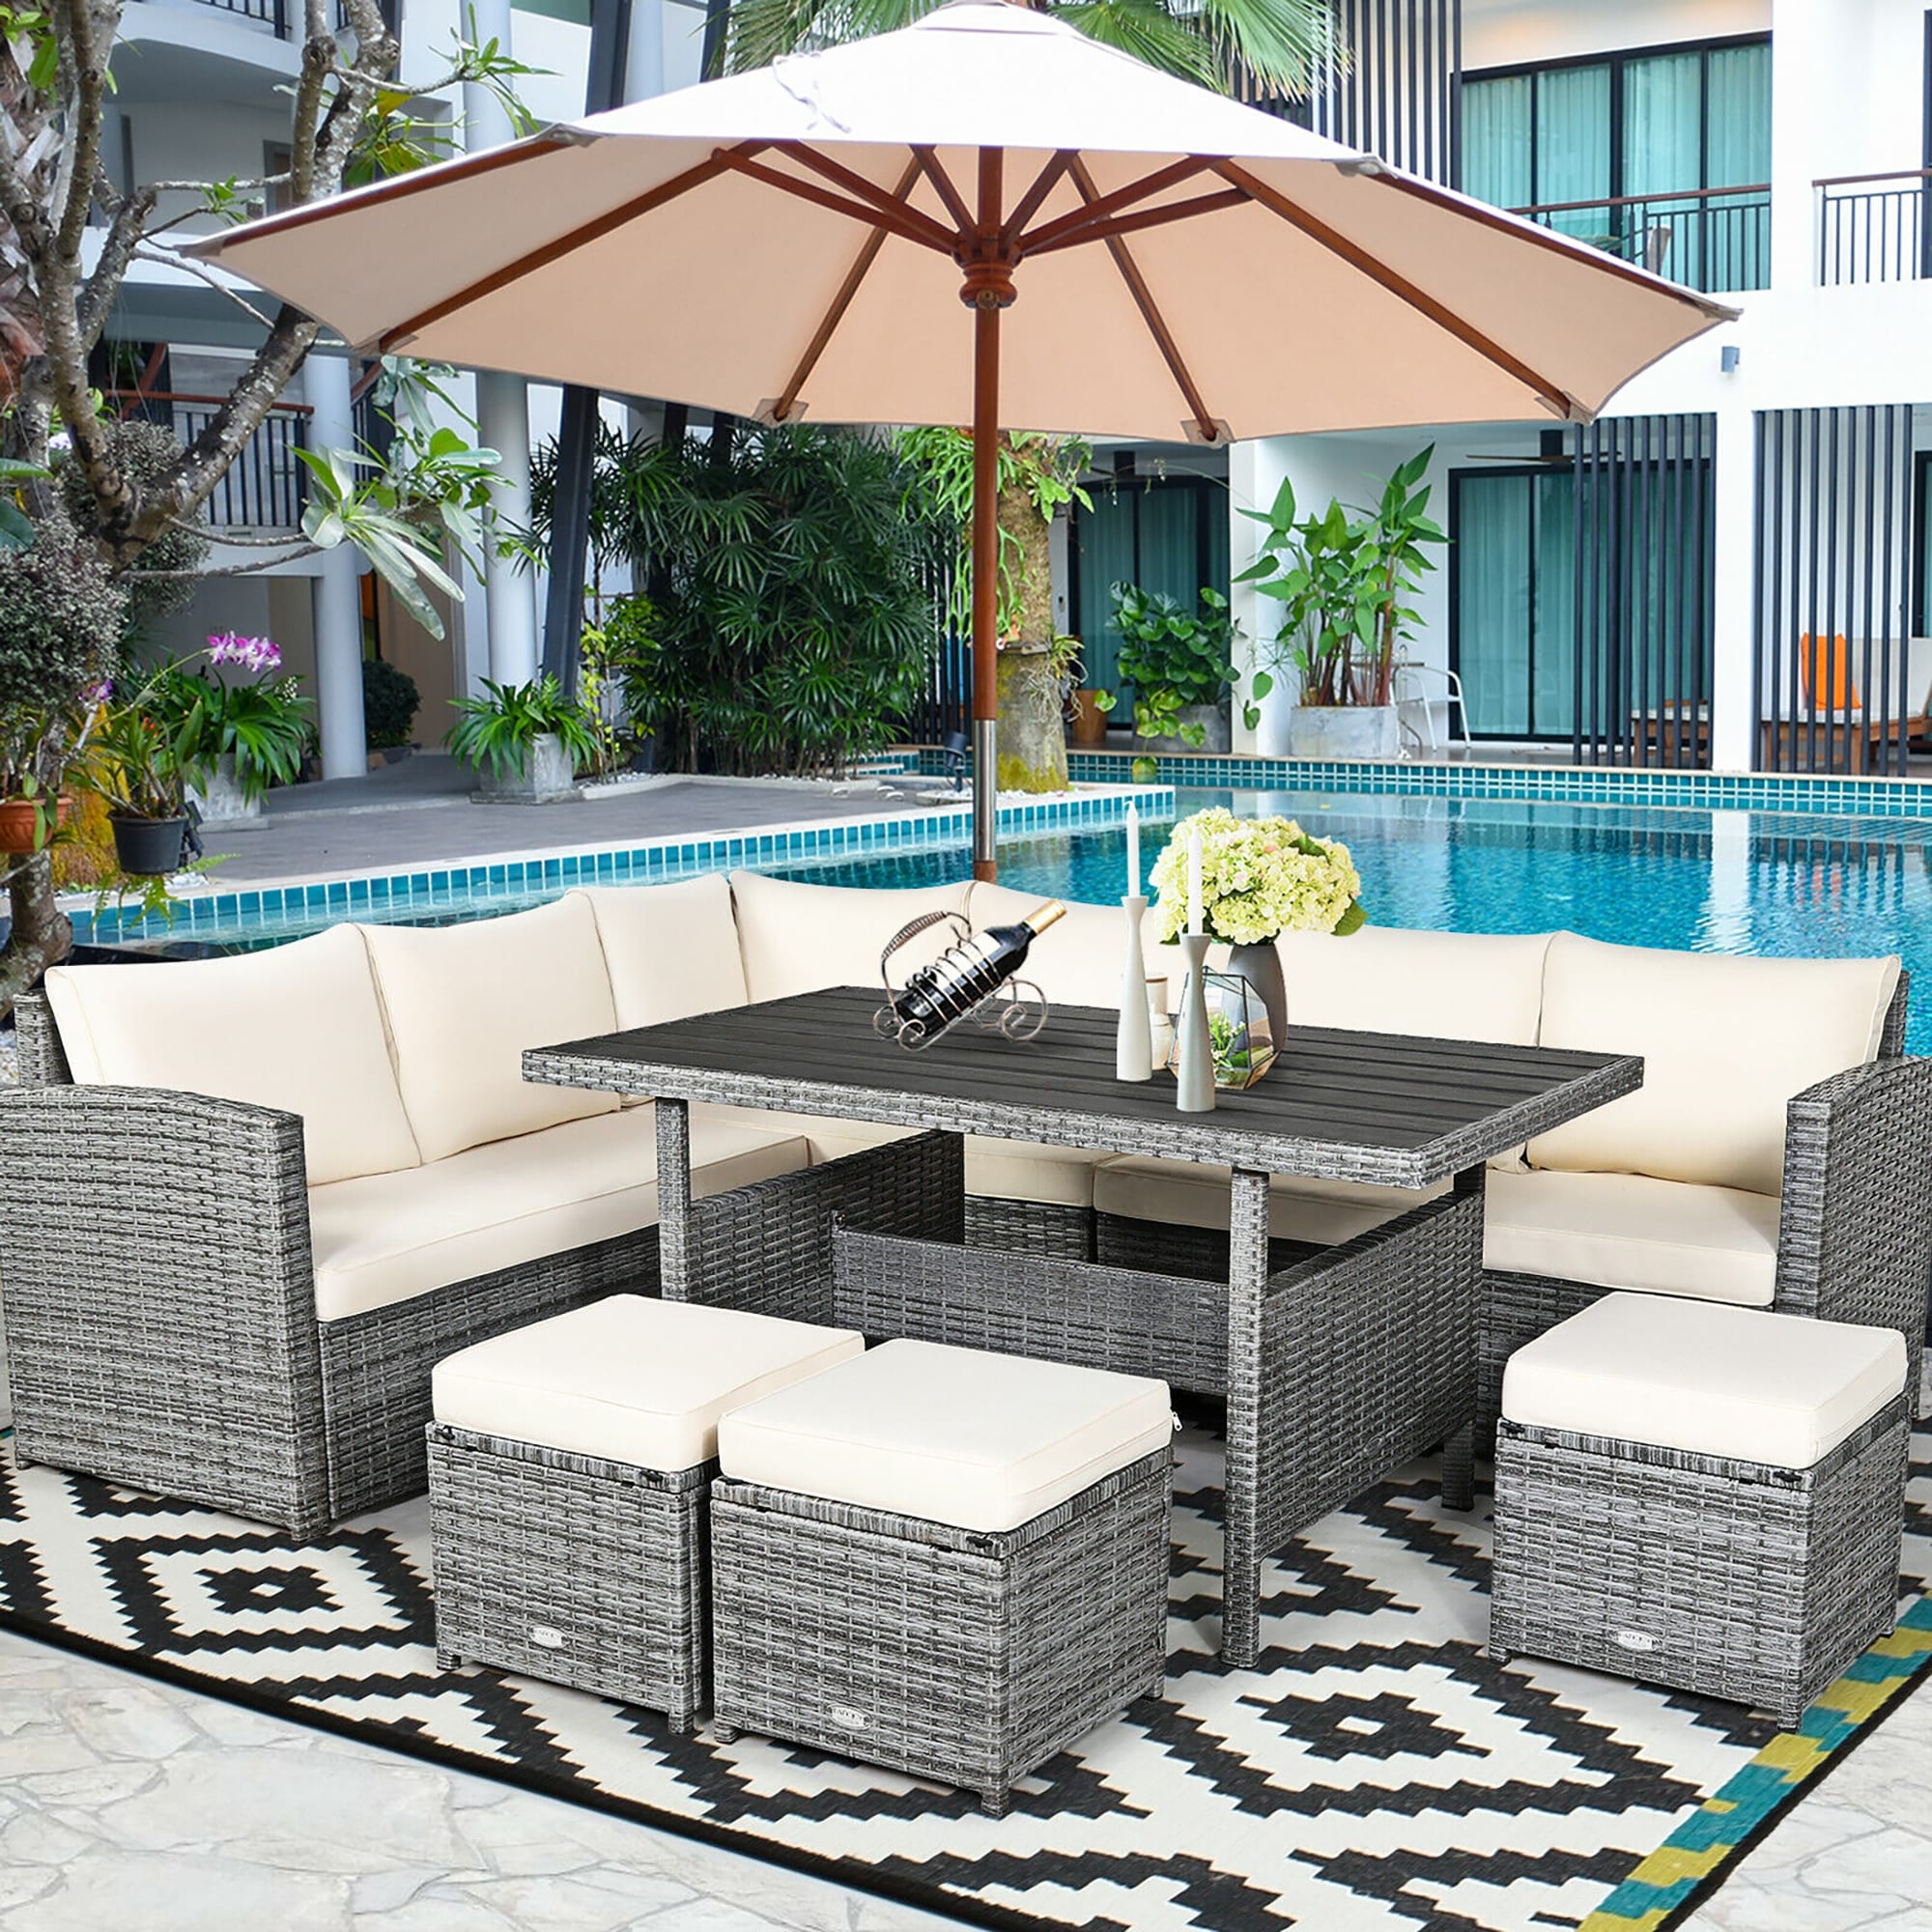 7 Pieces Patio Rattan Dining Furniture Sectional Sofa Set with Wicker Ottoman-Beige | - Forclover HYFL-90WH